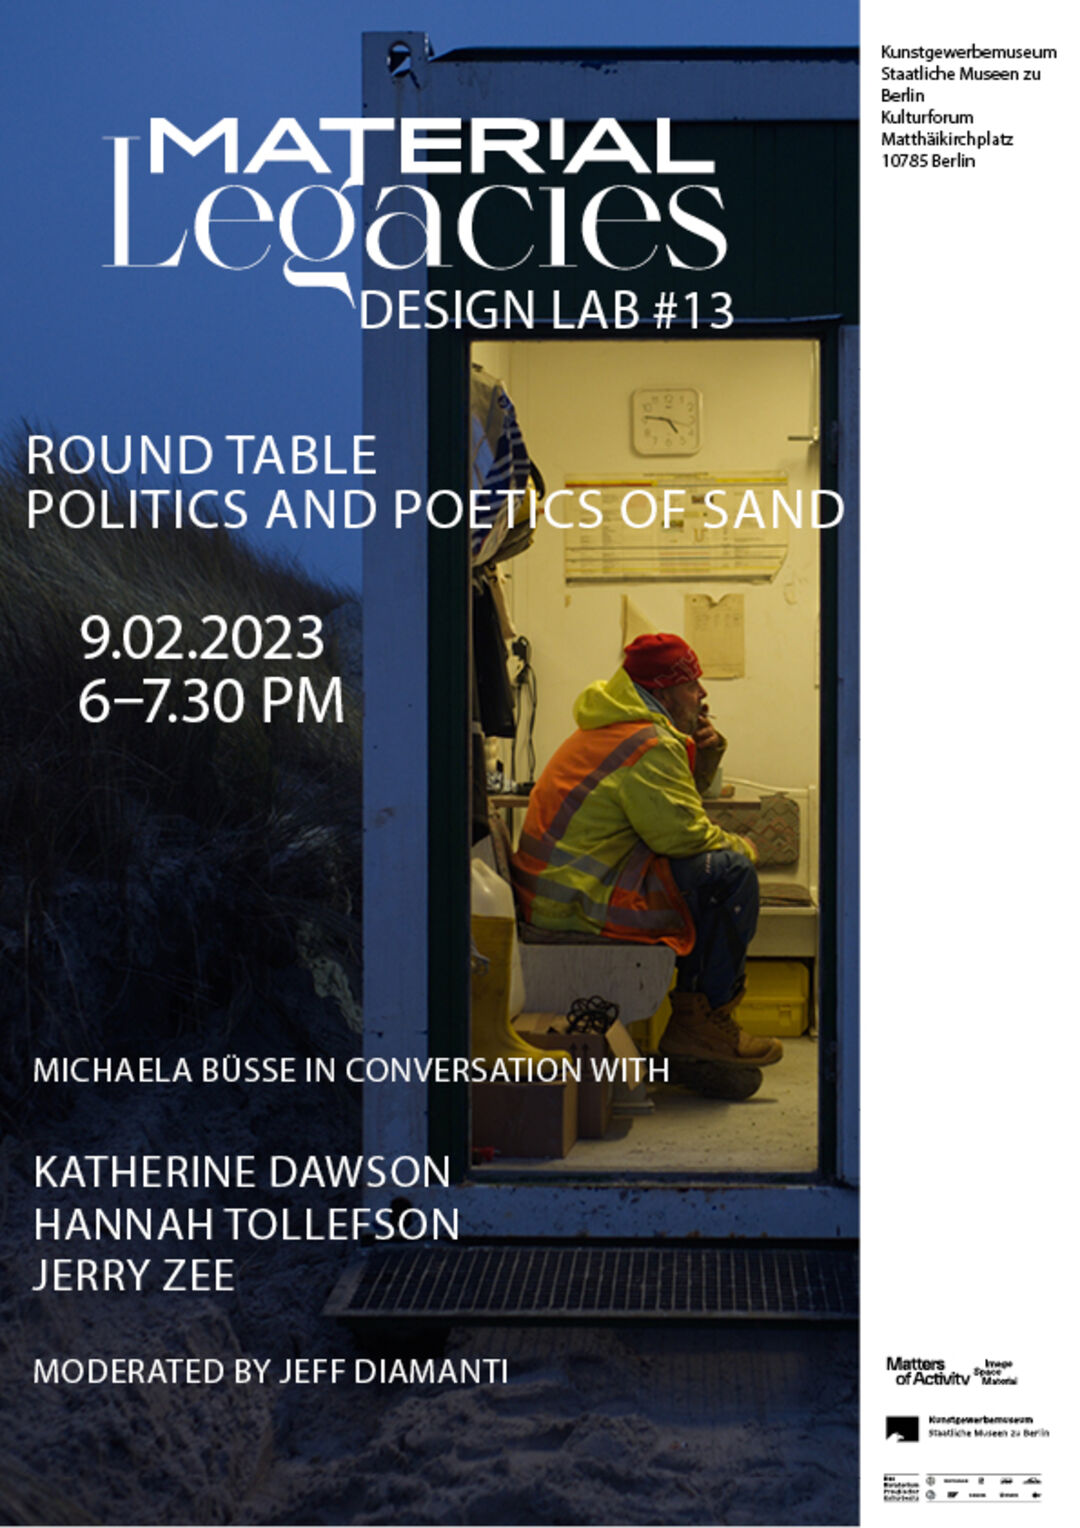 Round Table »Poetics and Politics of Sand«. Design: studioeins, adapted by Matters of Activity
